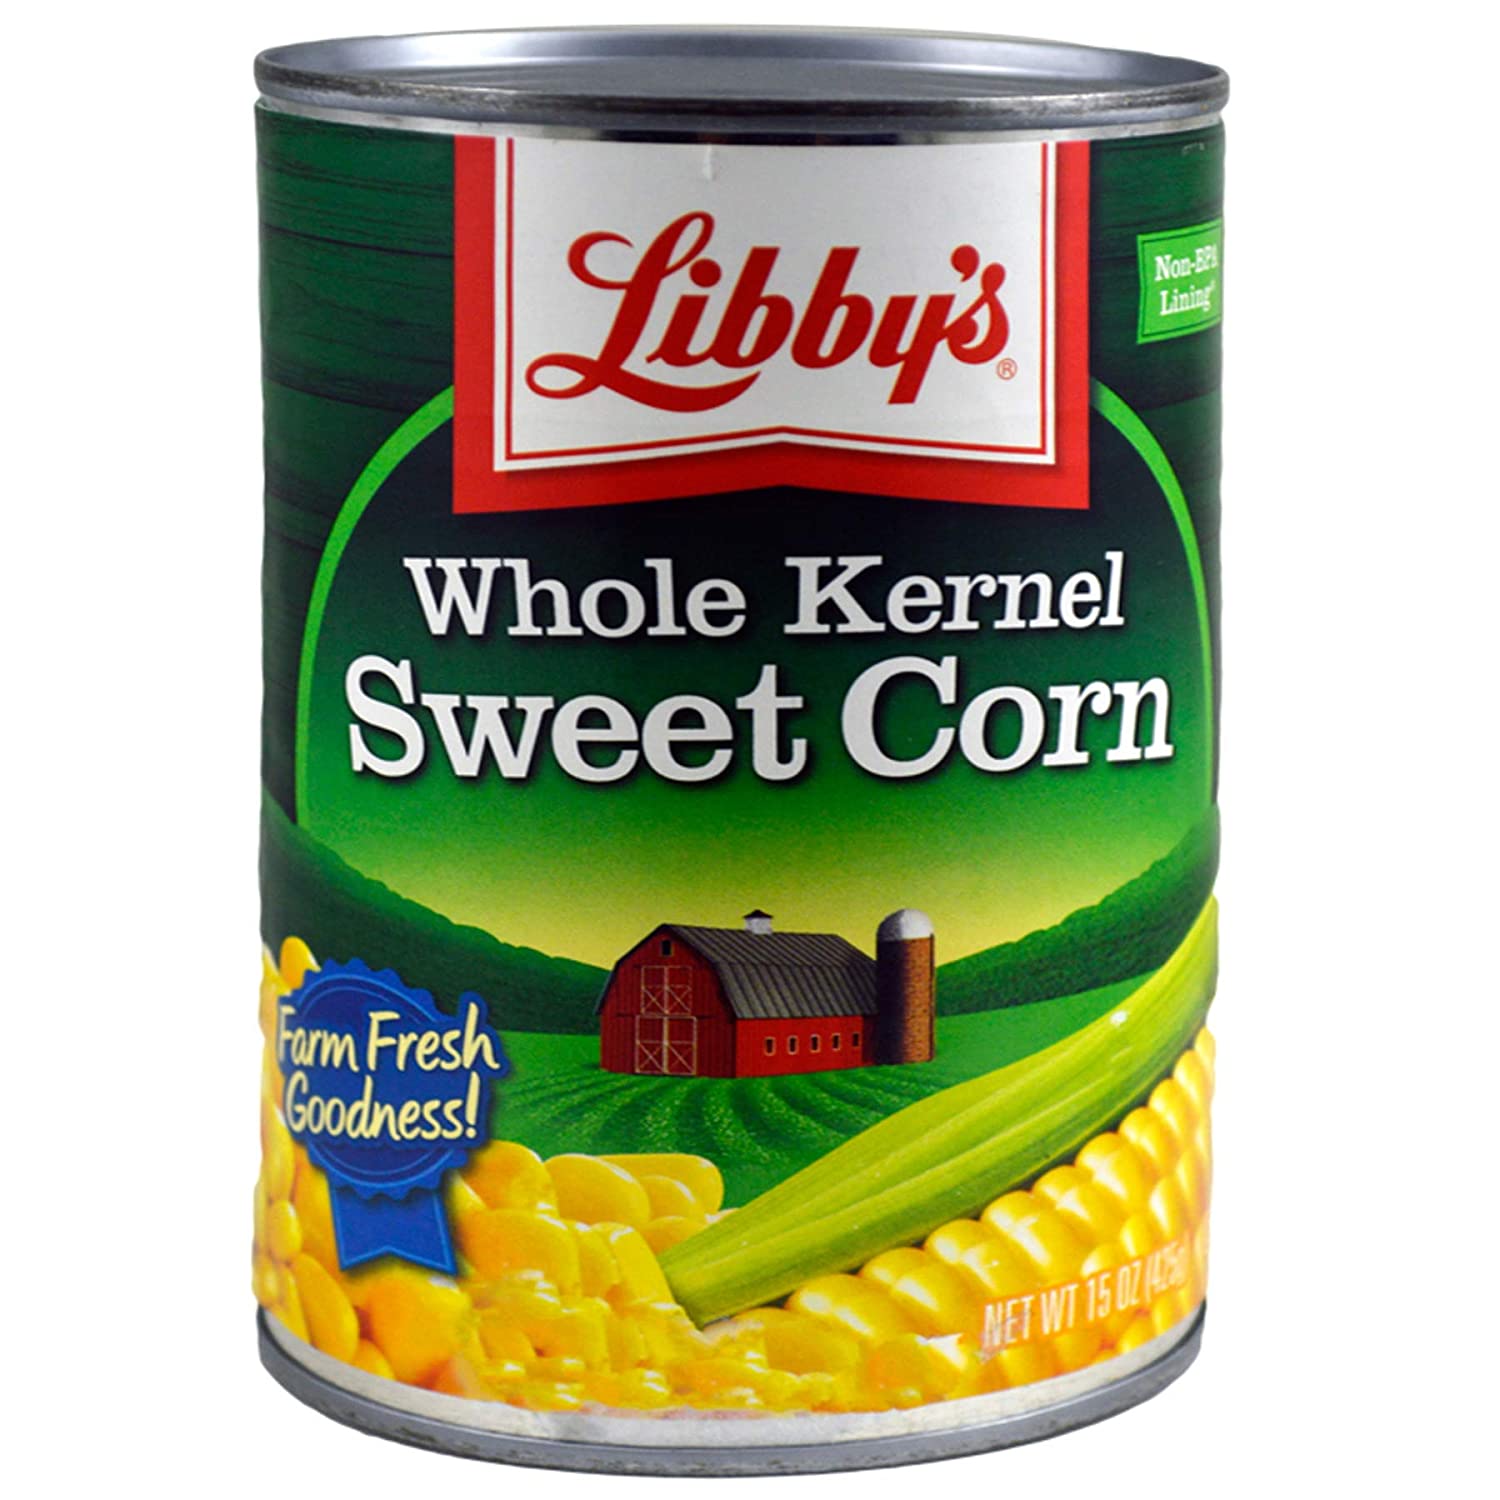 gre>Whole Kernel Sweet Corn - Libby's - 432g Canned